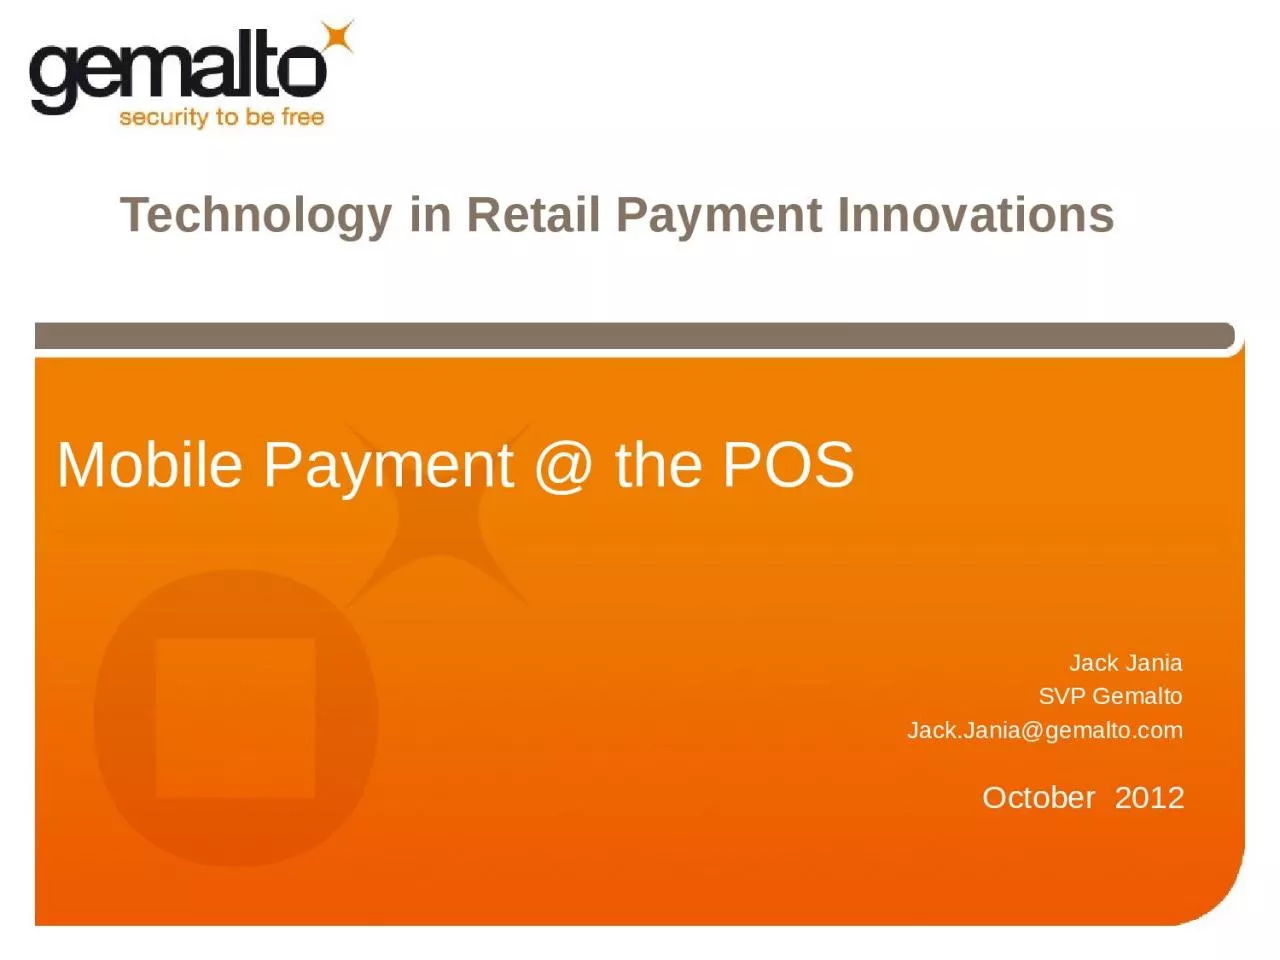 Mobile Payment @ the POS